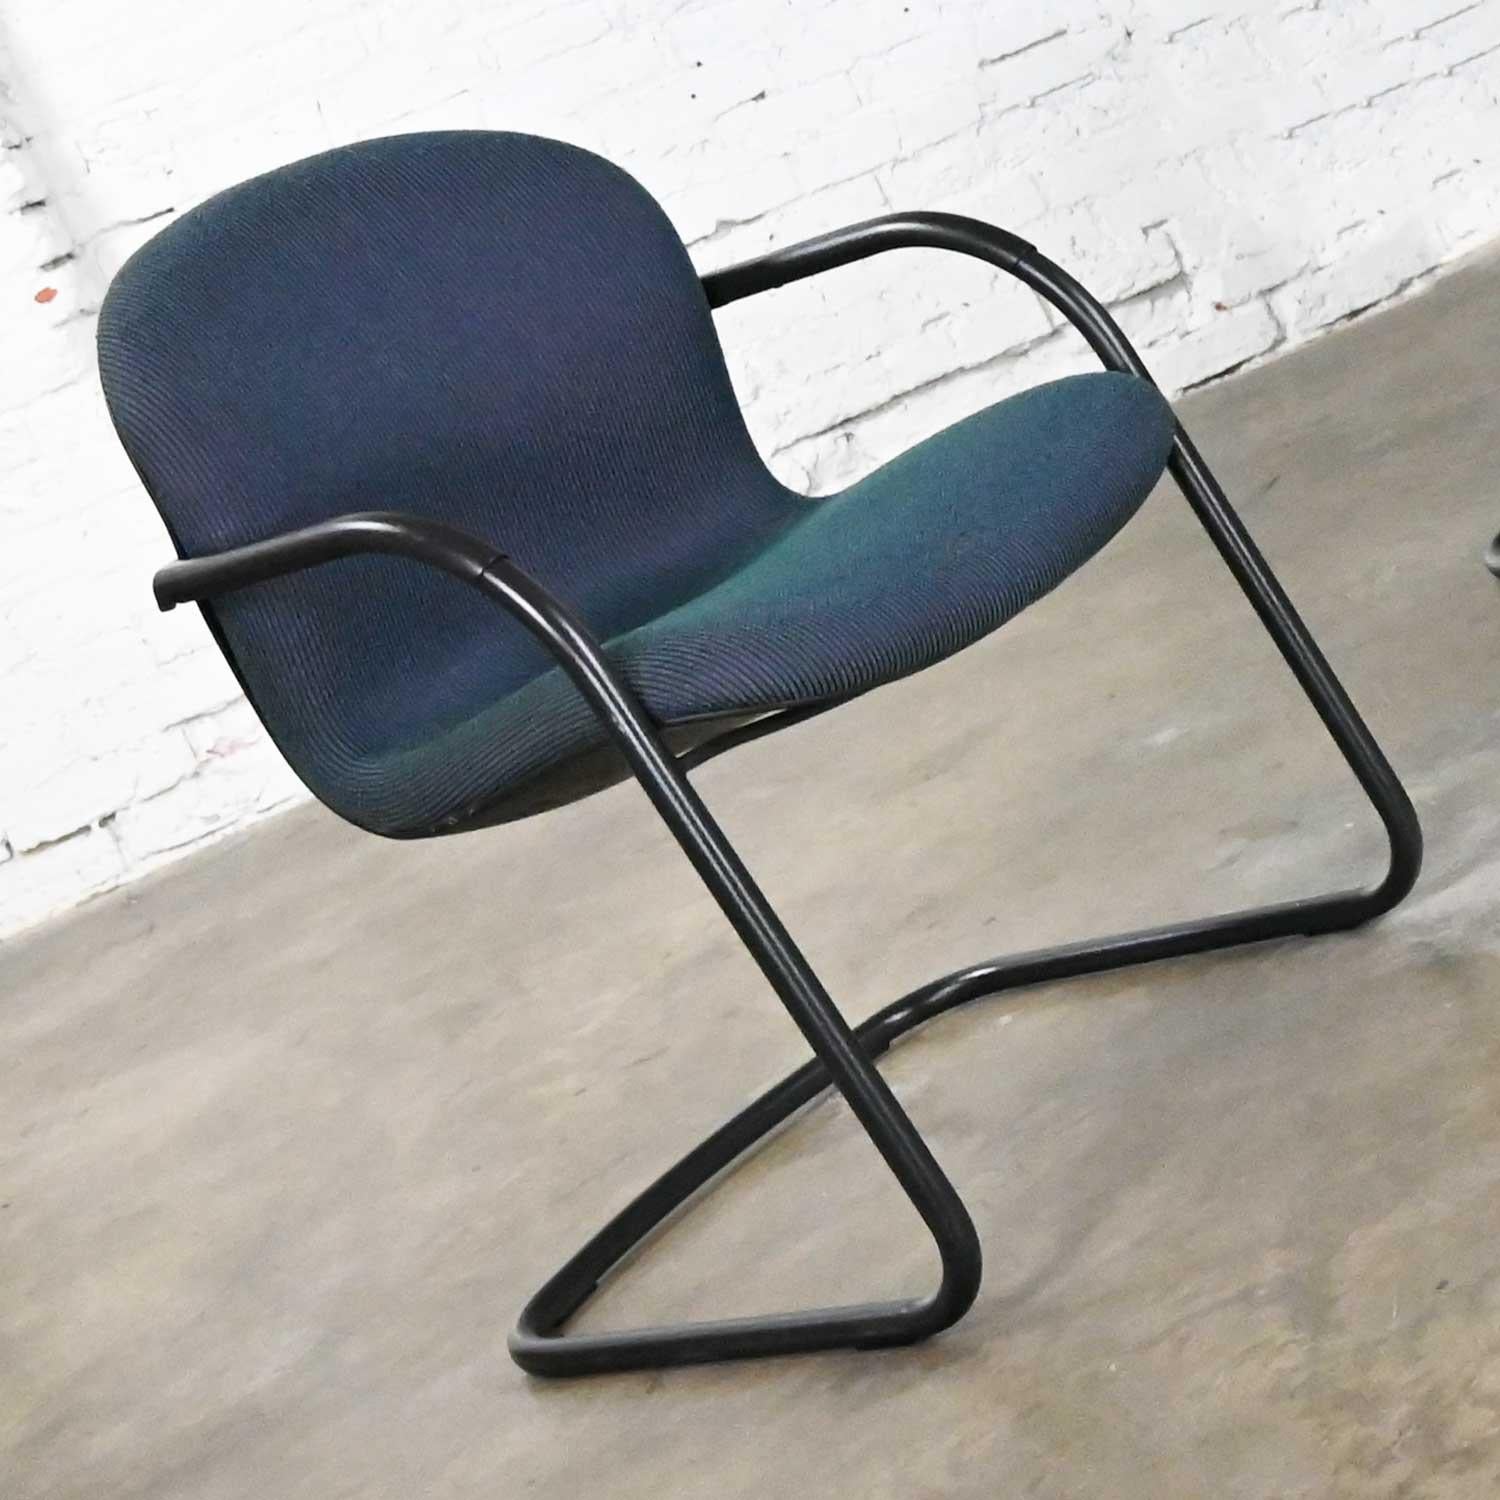 Vintage Modern Bulldog Armed Side Chairs by McCoy & Fahnstrom for Knoll Set 12 For Sale 6